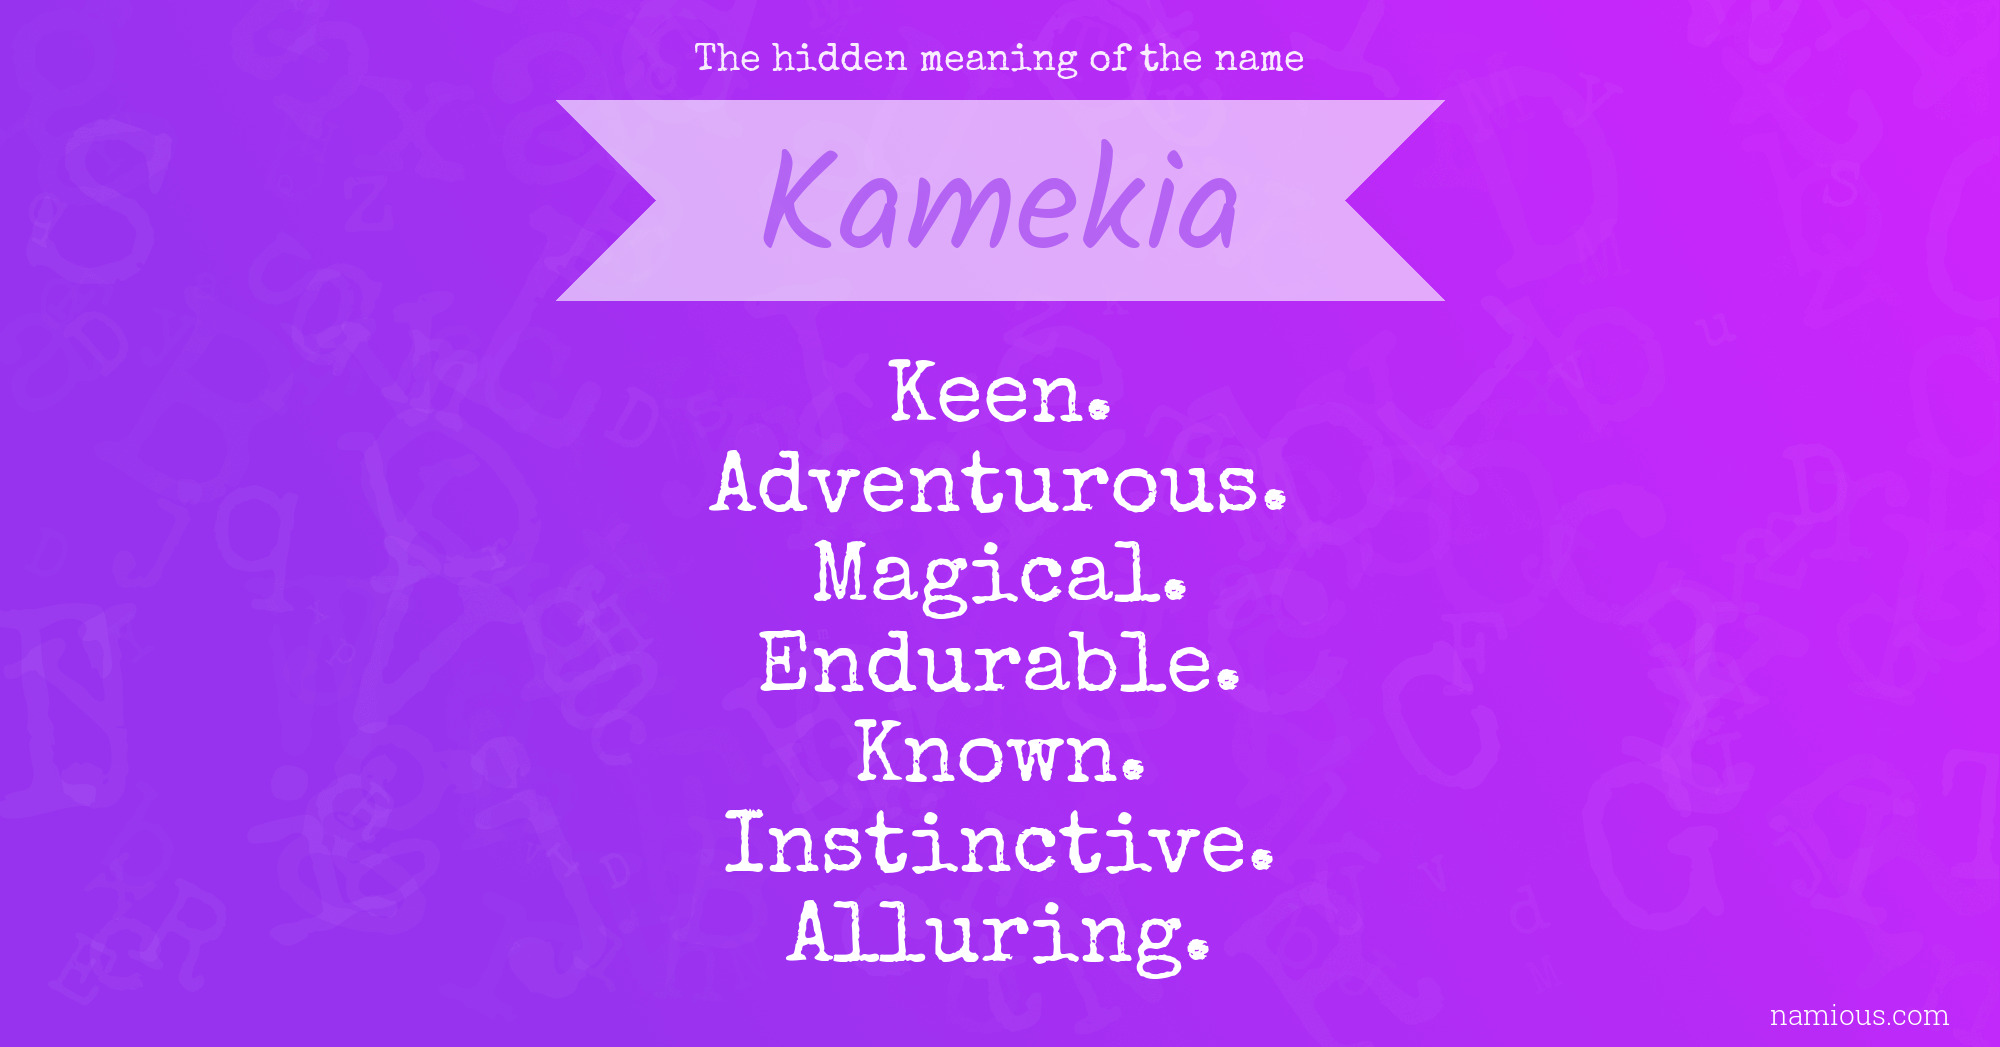 The hidden meaning of the name Kamekia